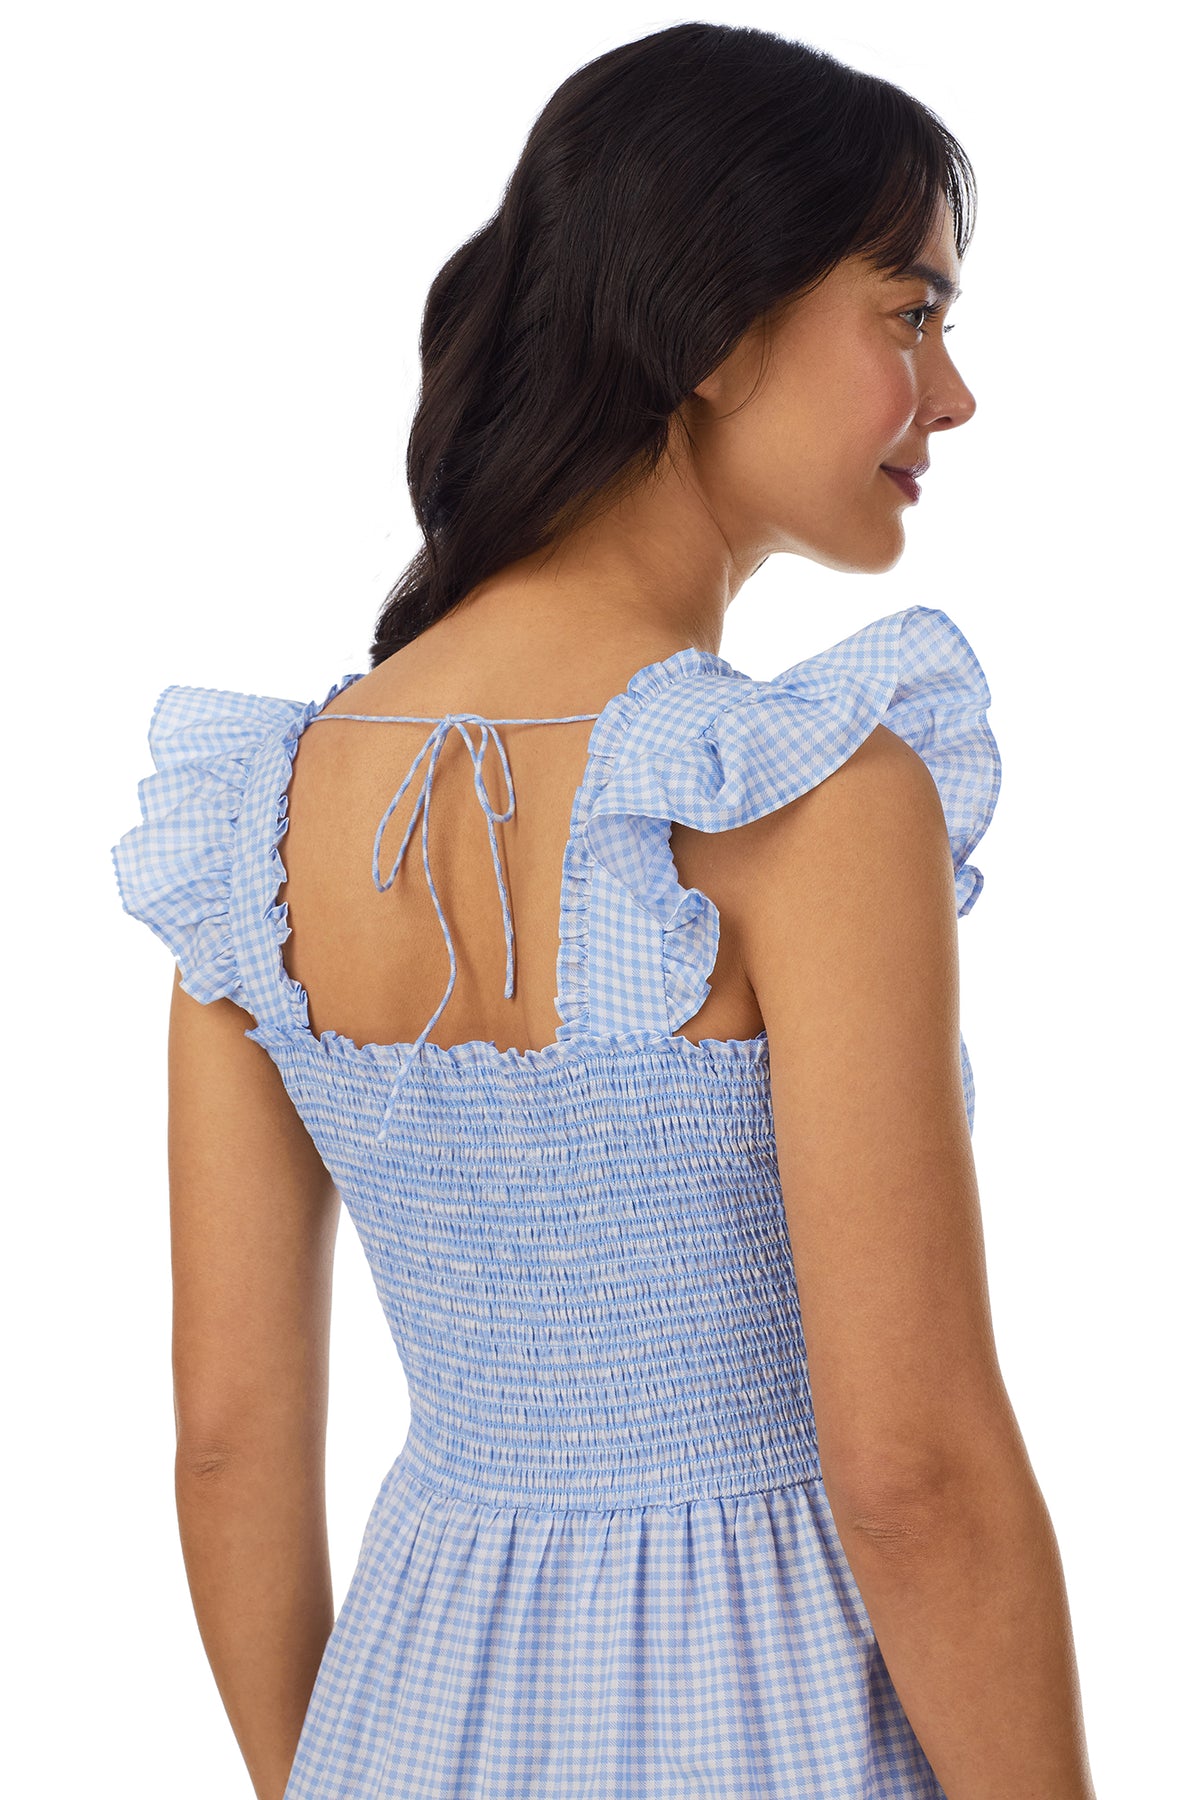 A lady wearing a blue butterfly sleeve Dress with white check pattern